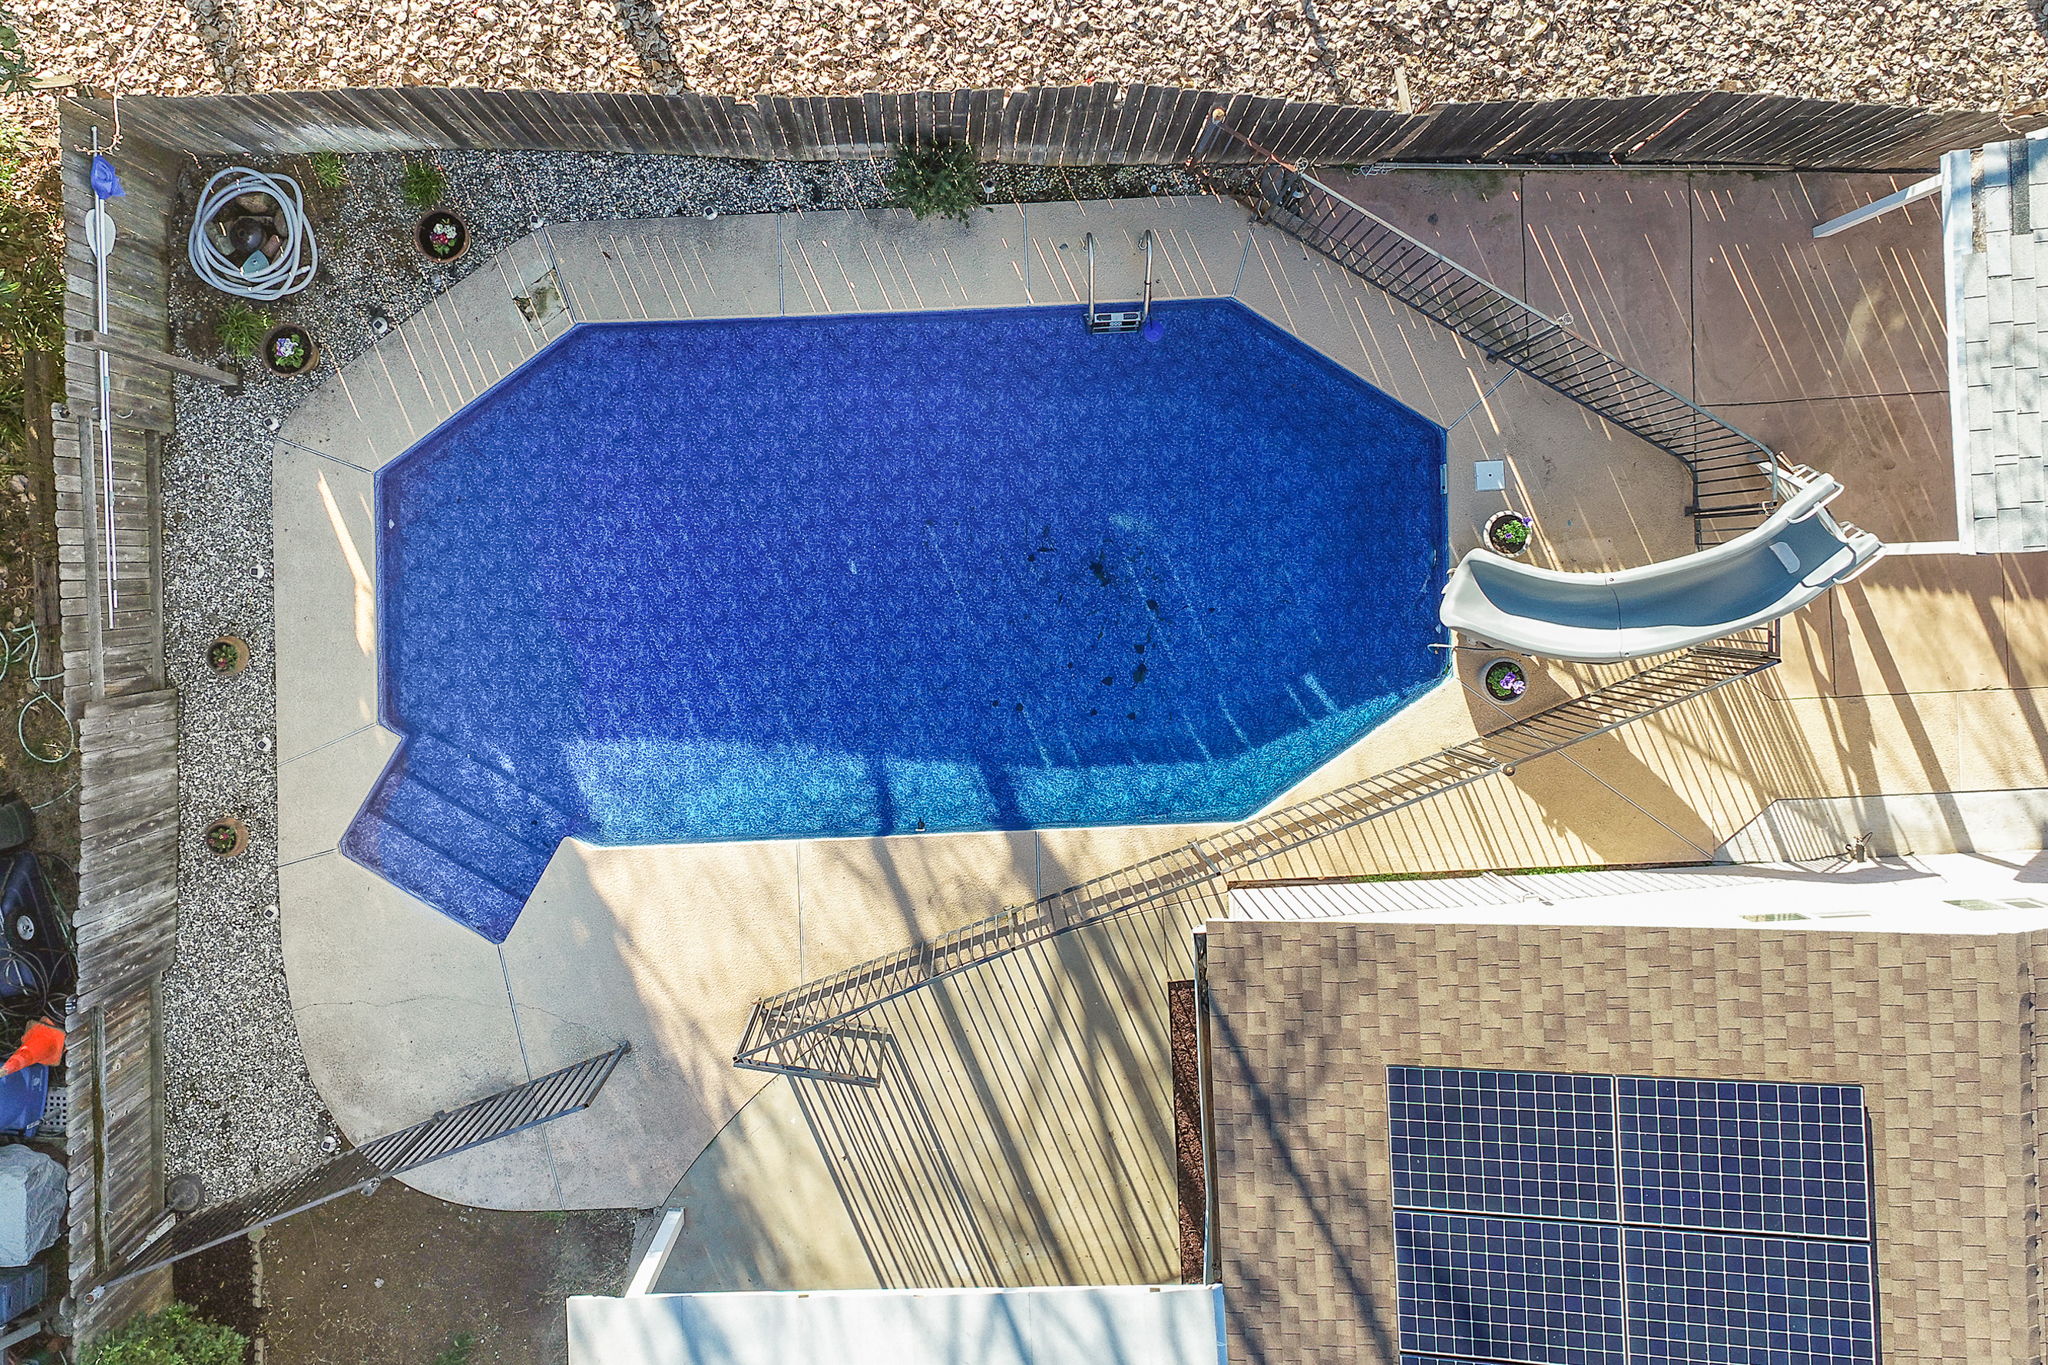 Pool from view above